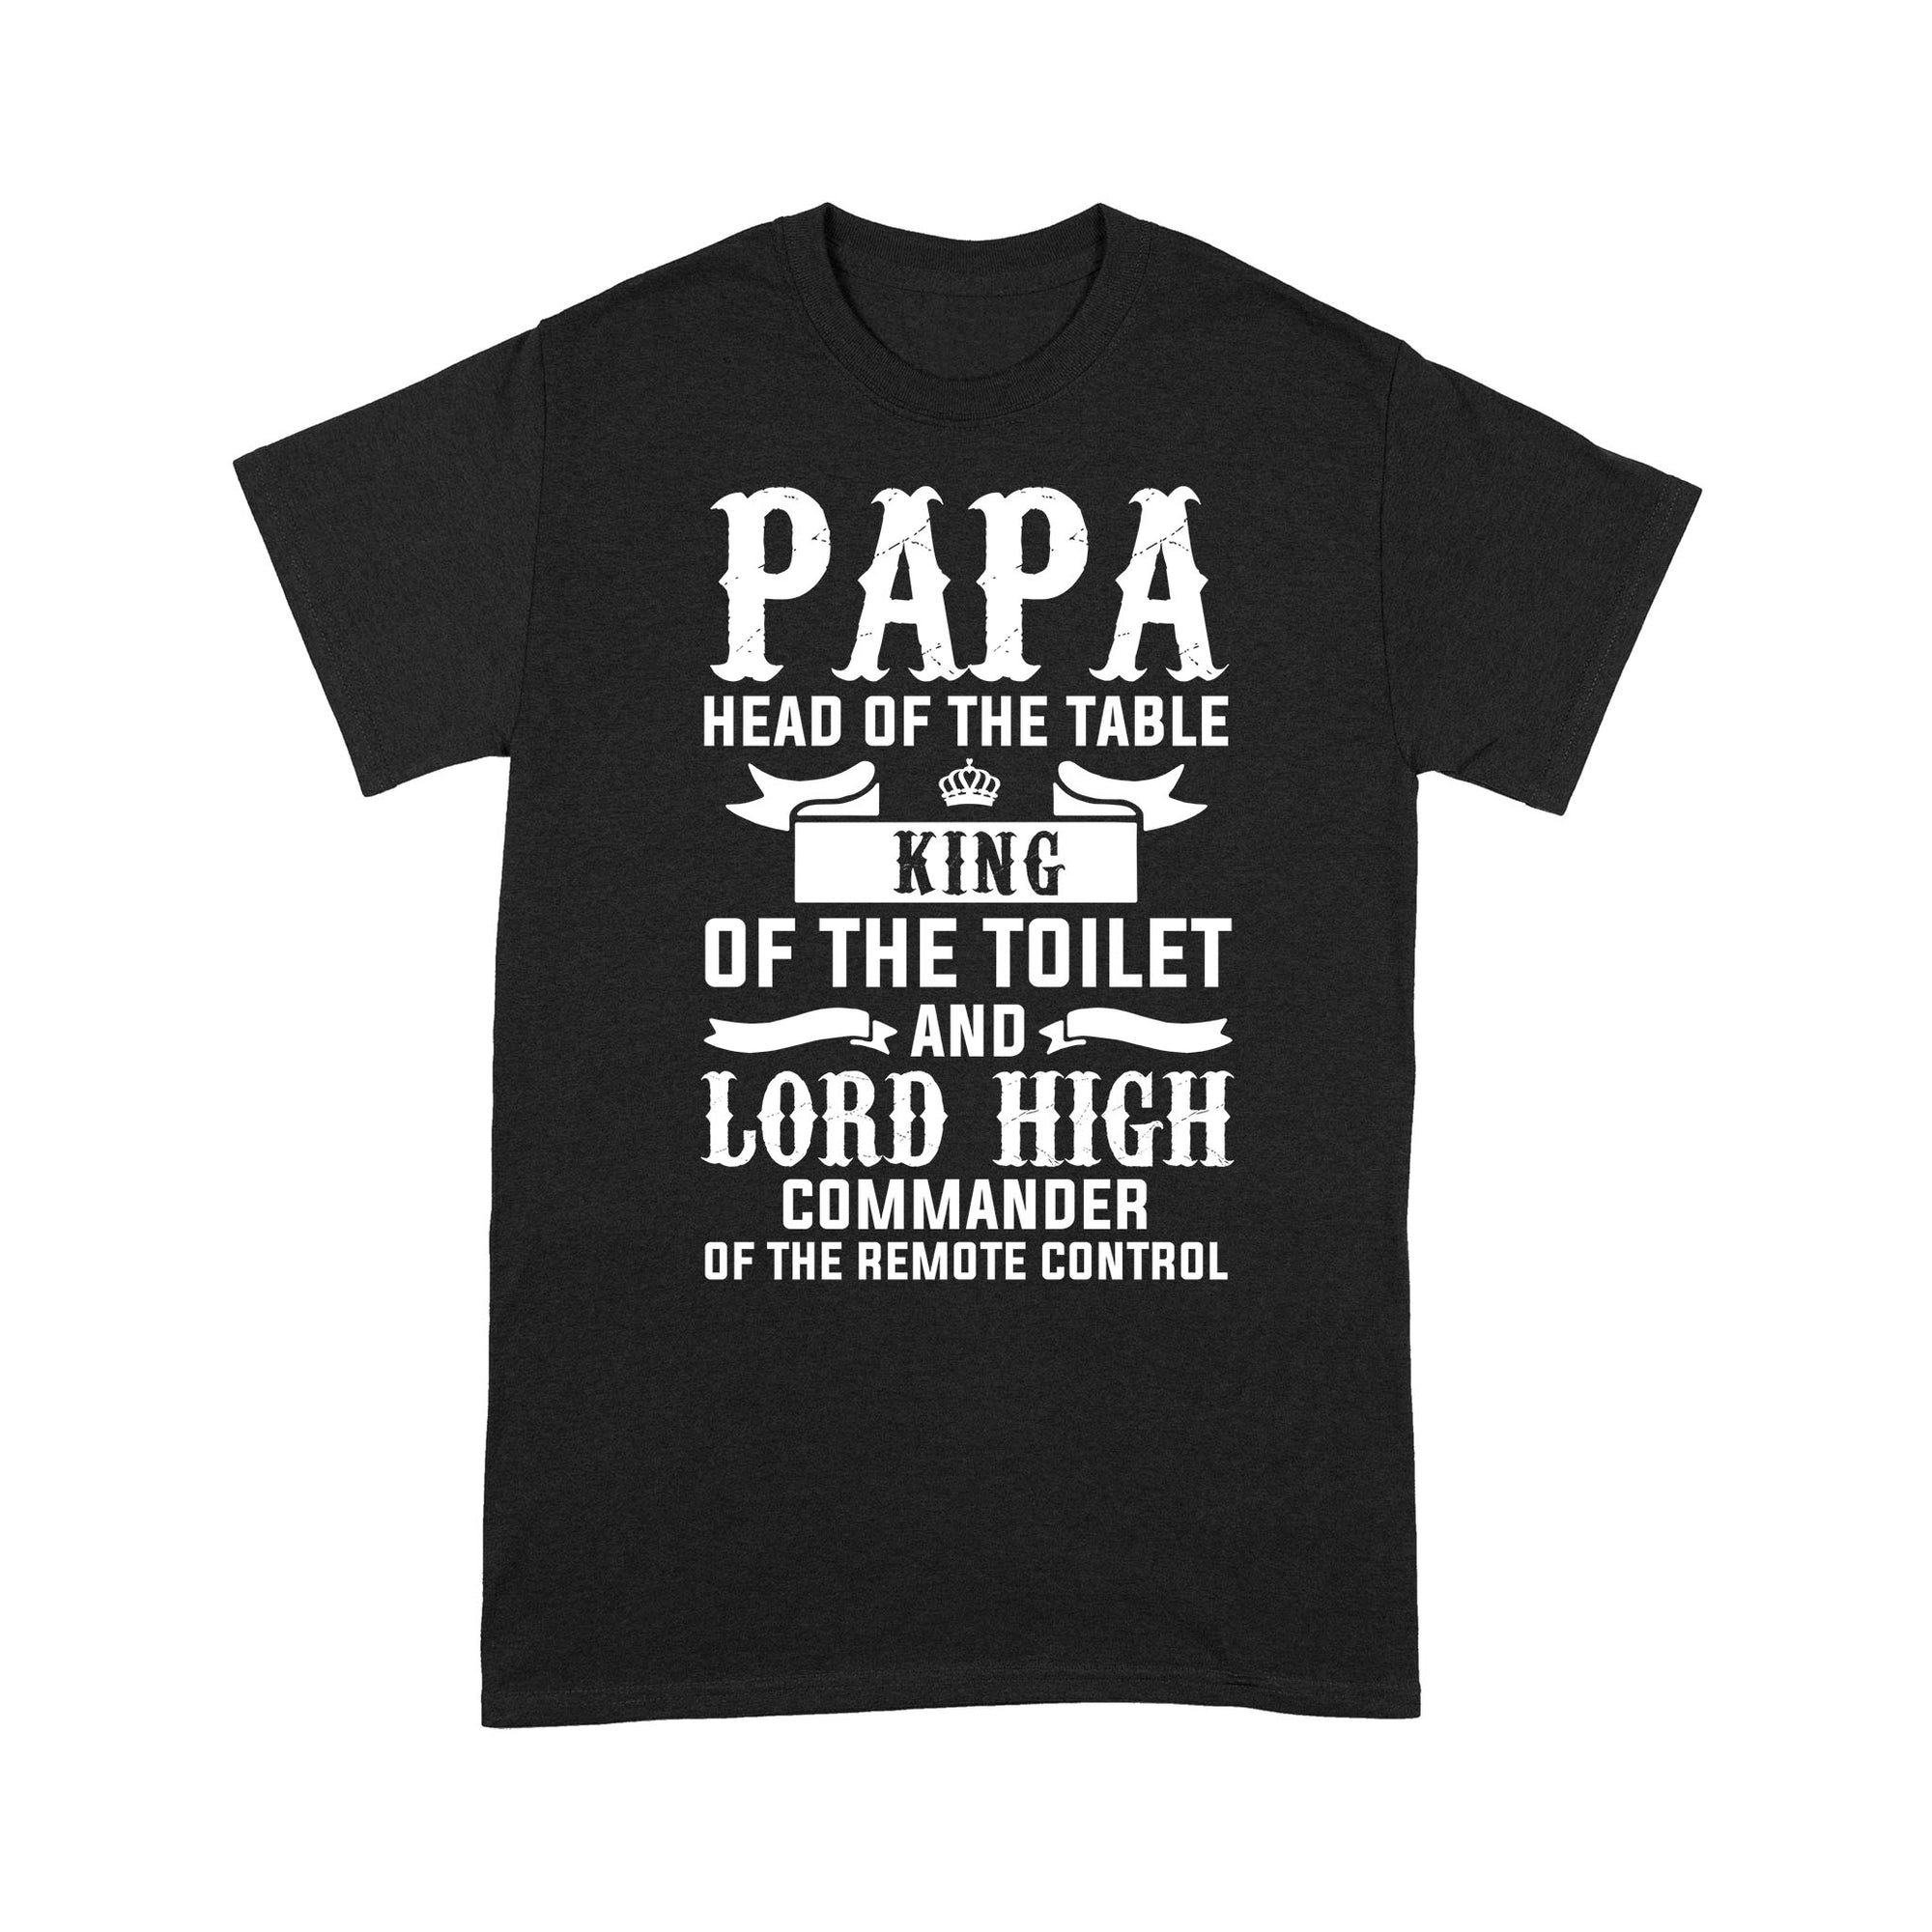 Papa Head Of The Table King Of The Toilet And Lord High Commander Of The Remote Control - Standard T-shirt